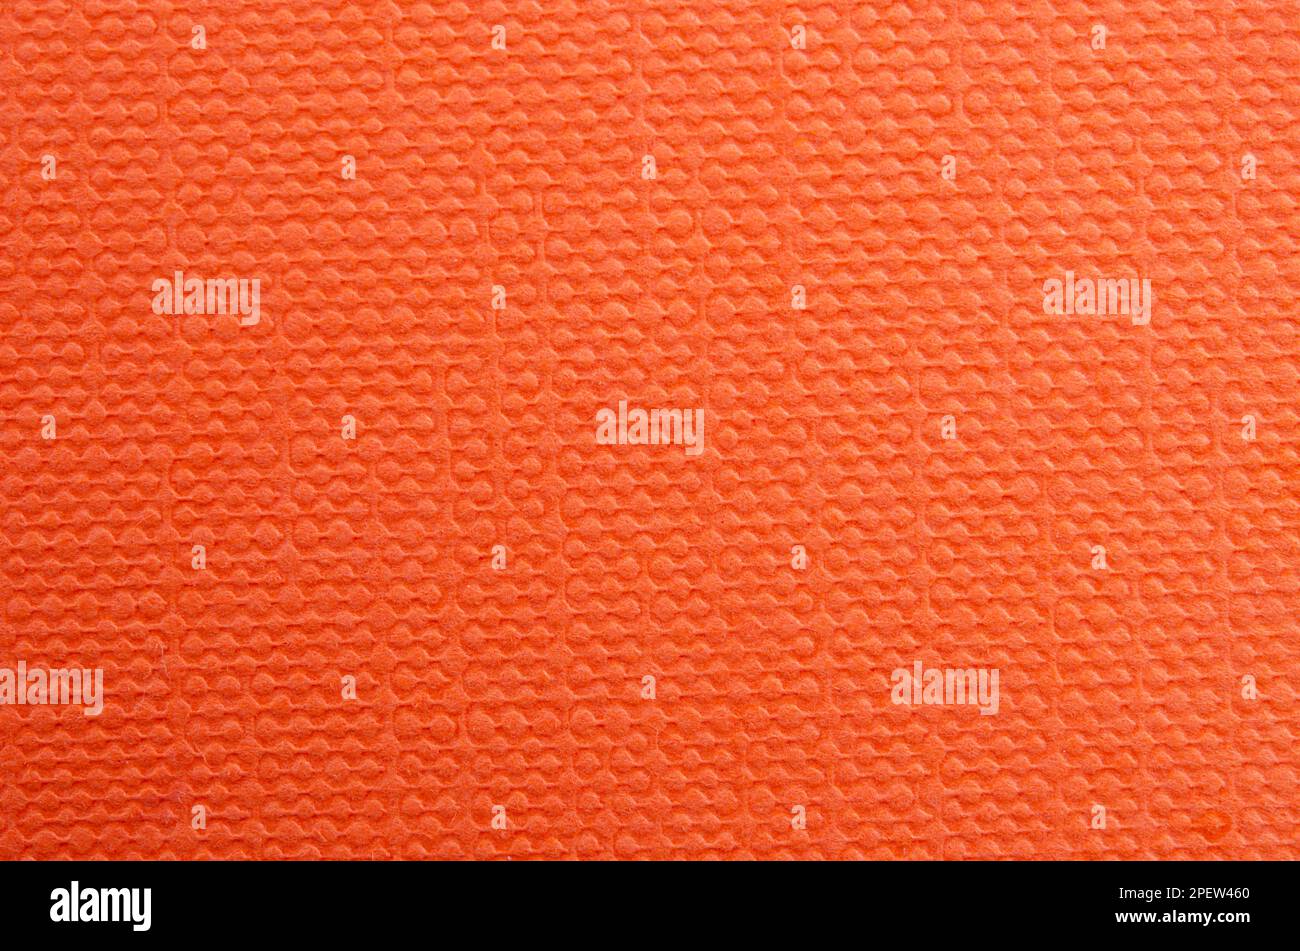 Background Of Crumpled Orange Packaging Paper With Textured Surface,  Wrinkled Texture, Crumpled, Wrinkled Paper Background Image And Wallpaper  for Free Download